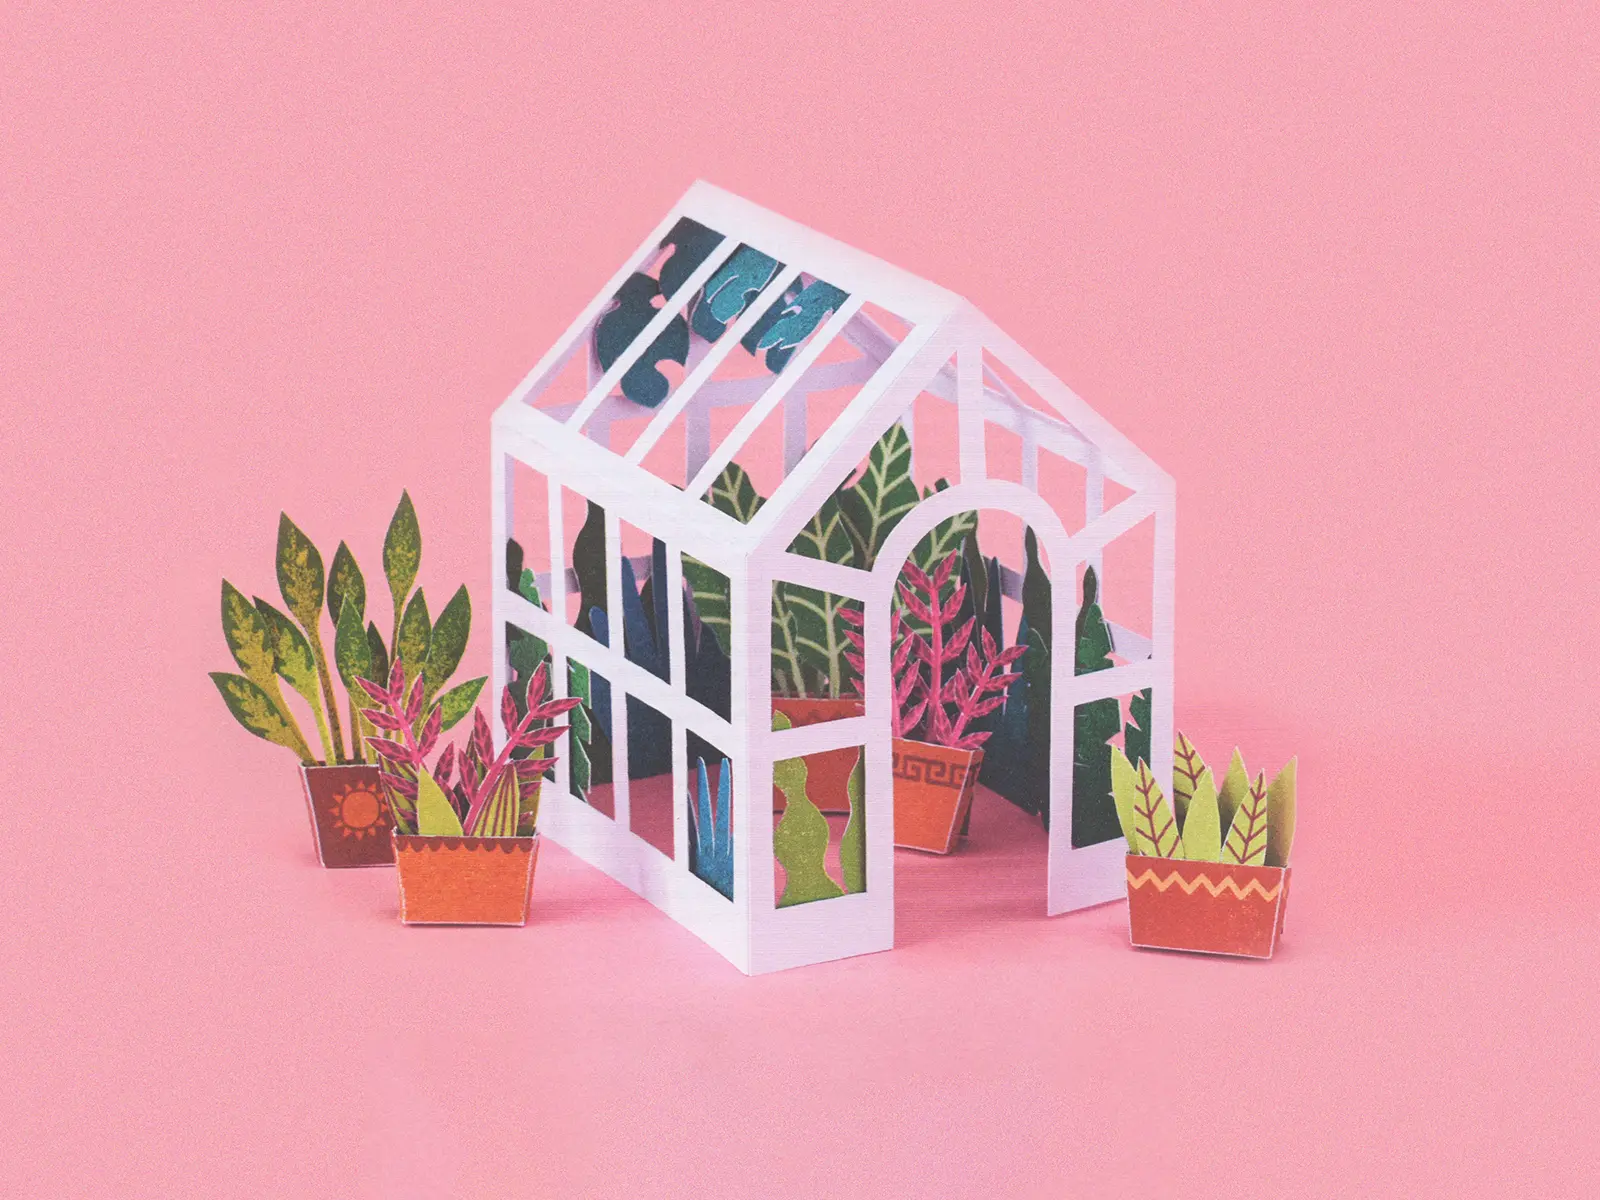 Project Calm: Greenhouse made of paper brimming with plants.